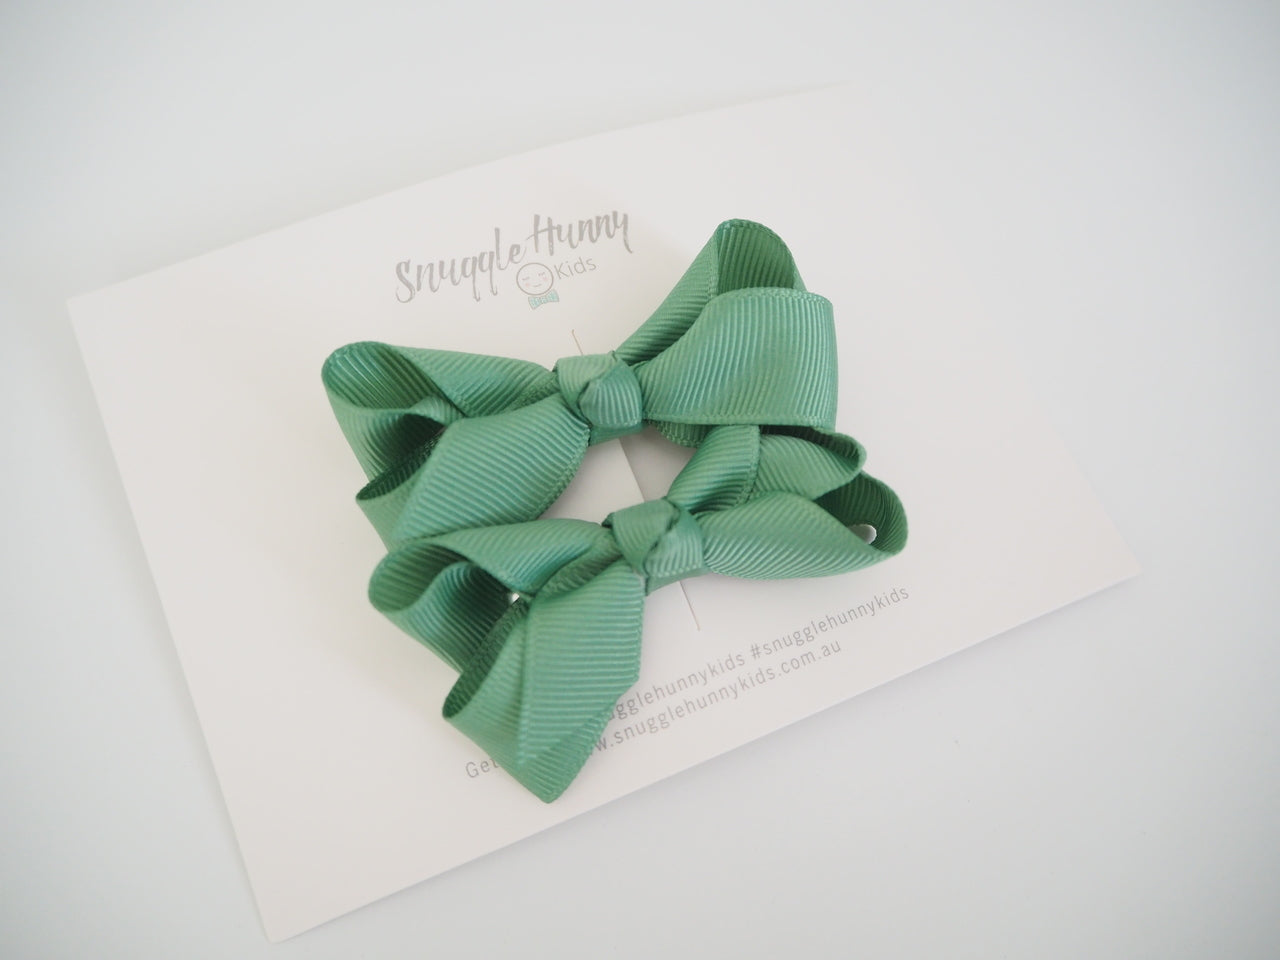 Snuggle Hunny Kids Hair Bow Clips - Olive Green